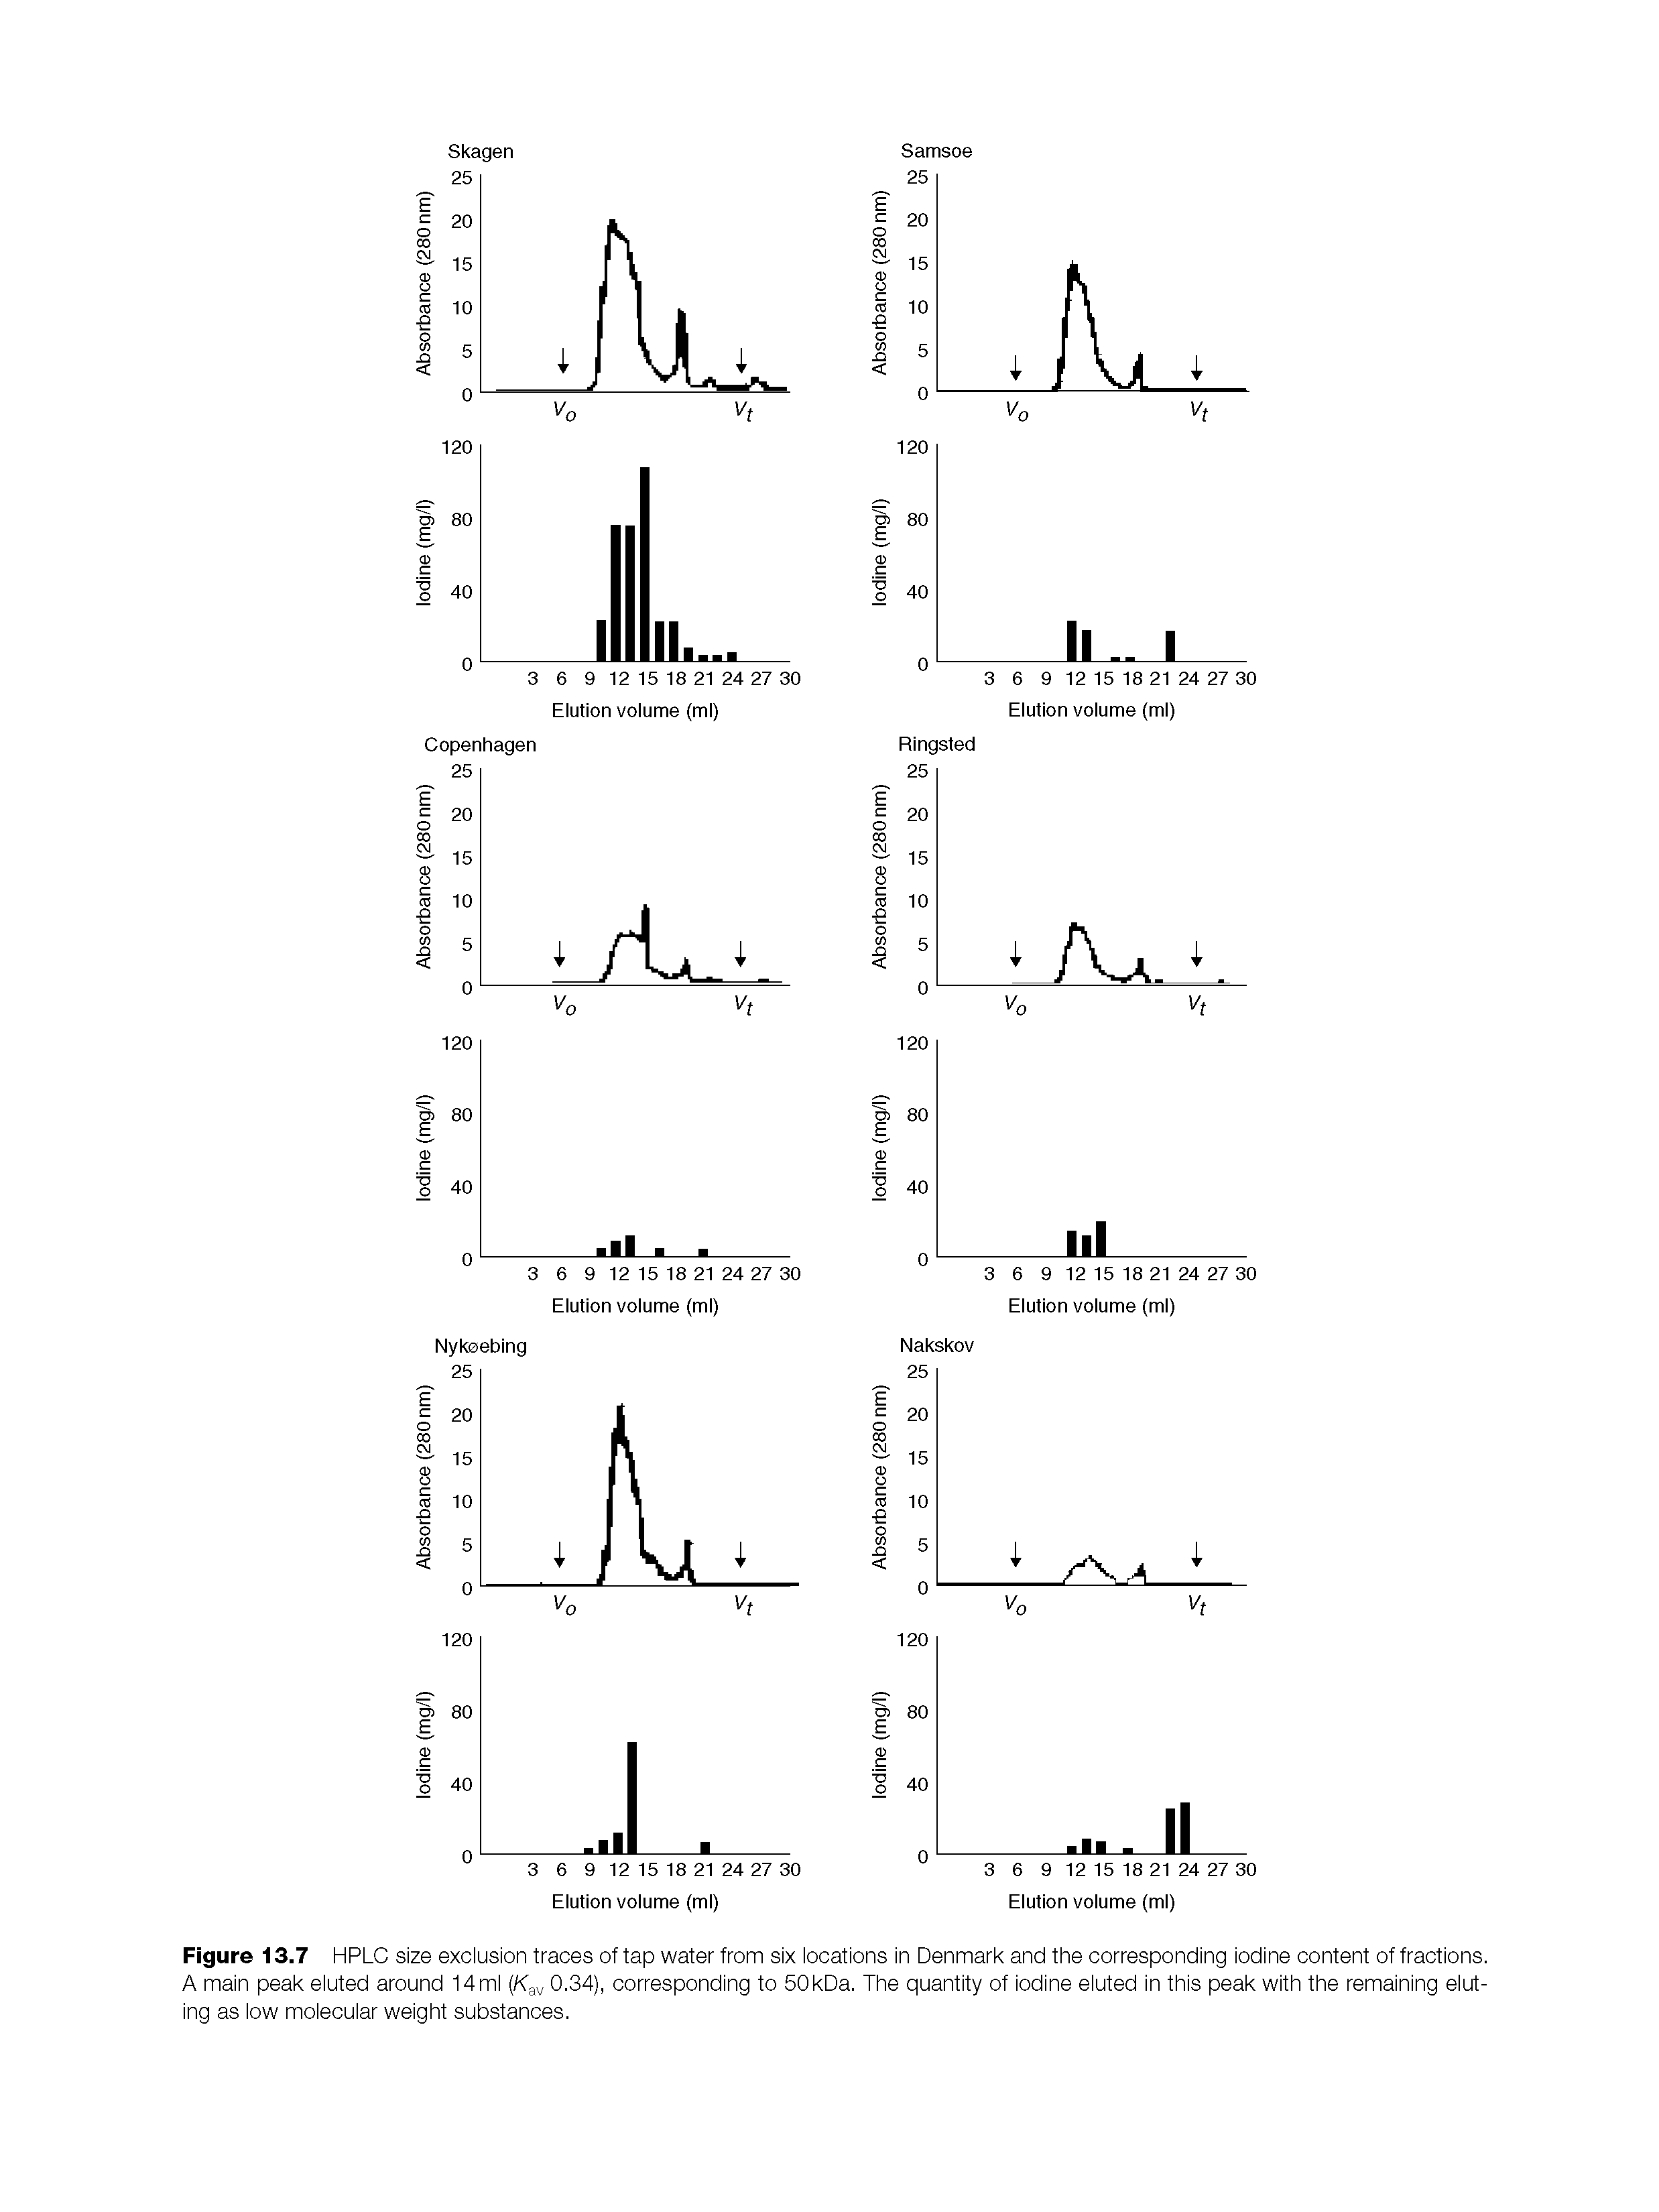 Figure 13.7 HPLC size exclusion traces of tap water from six locations in Denmark and the corresponding iodine content of fractions. A main peak eluted around 14 ml (Ka 0.34), corresponding to 50kDa. The quantity of iodine eluted in this peak with the remaining eluting as low molecular weight substances.